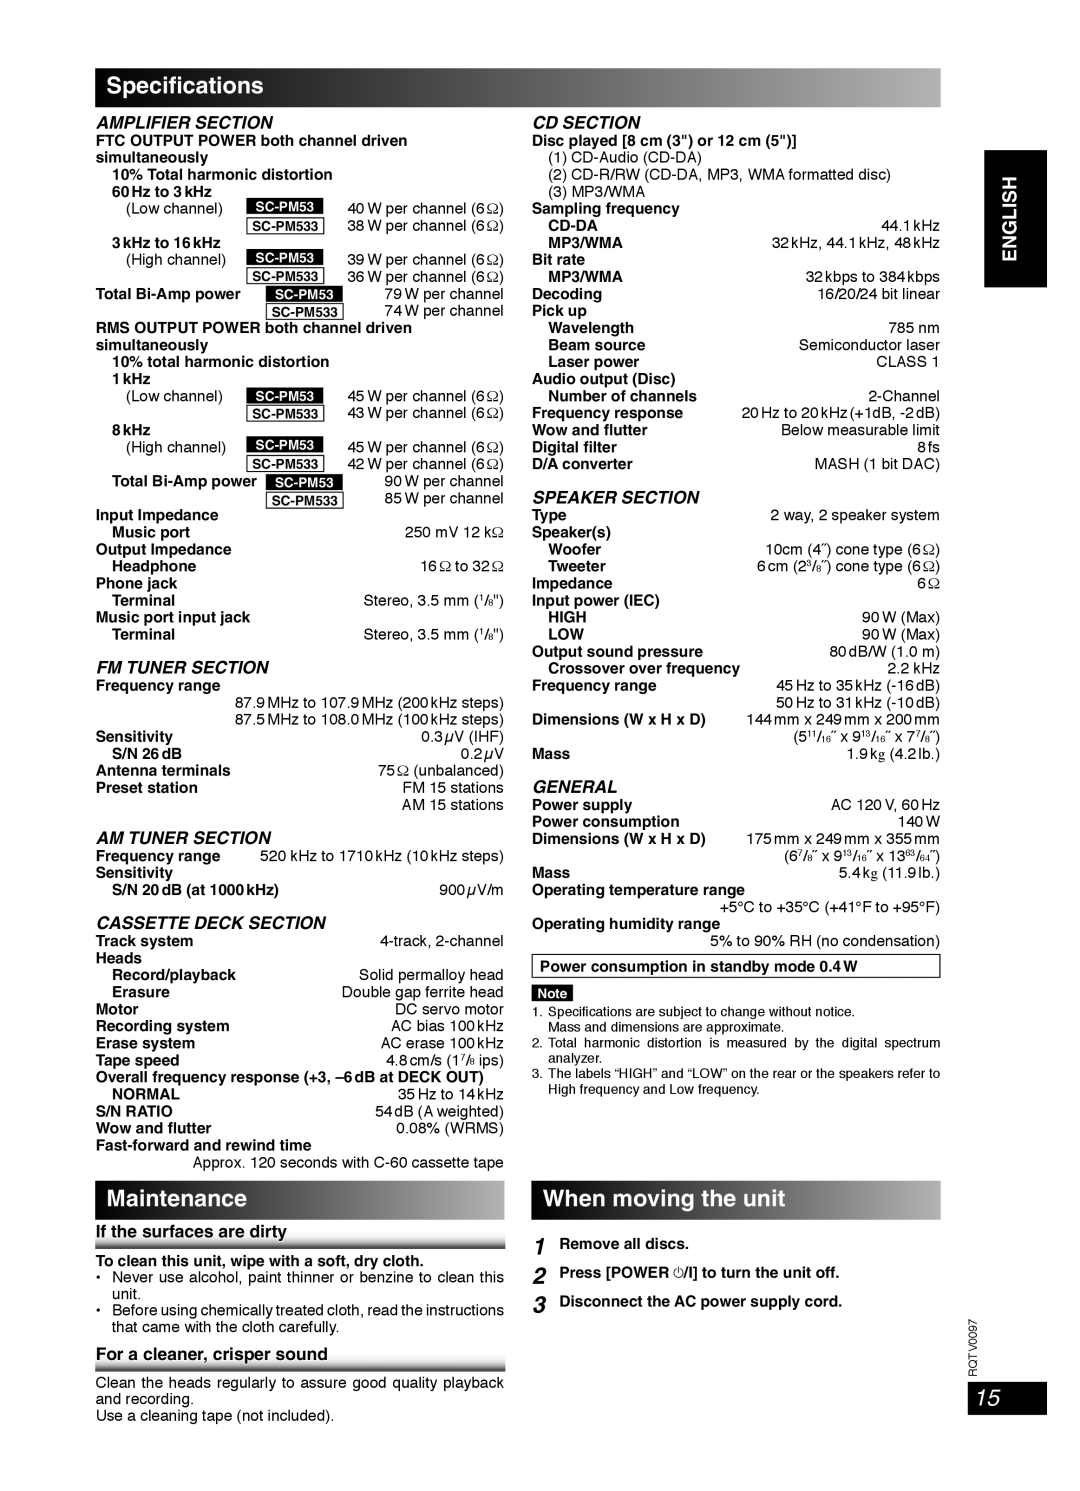 Panasonic RQTV0097-2P Speciﬁcations, Maintenance, When moving the unit, Amplifier Section, Cd Section, Am Tuner Section 